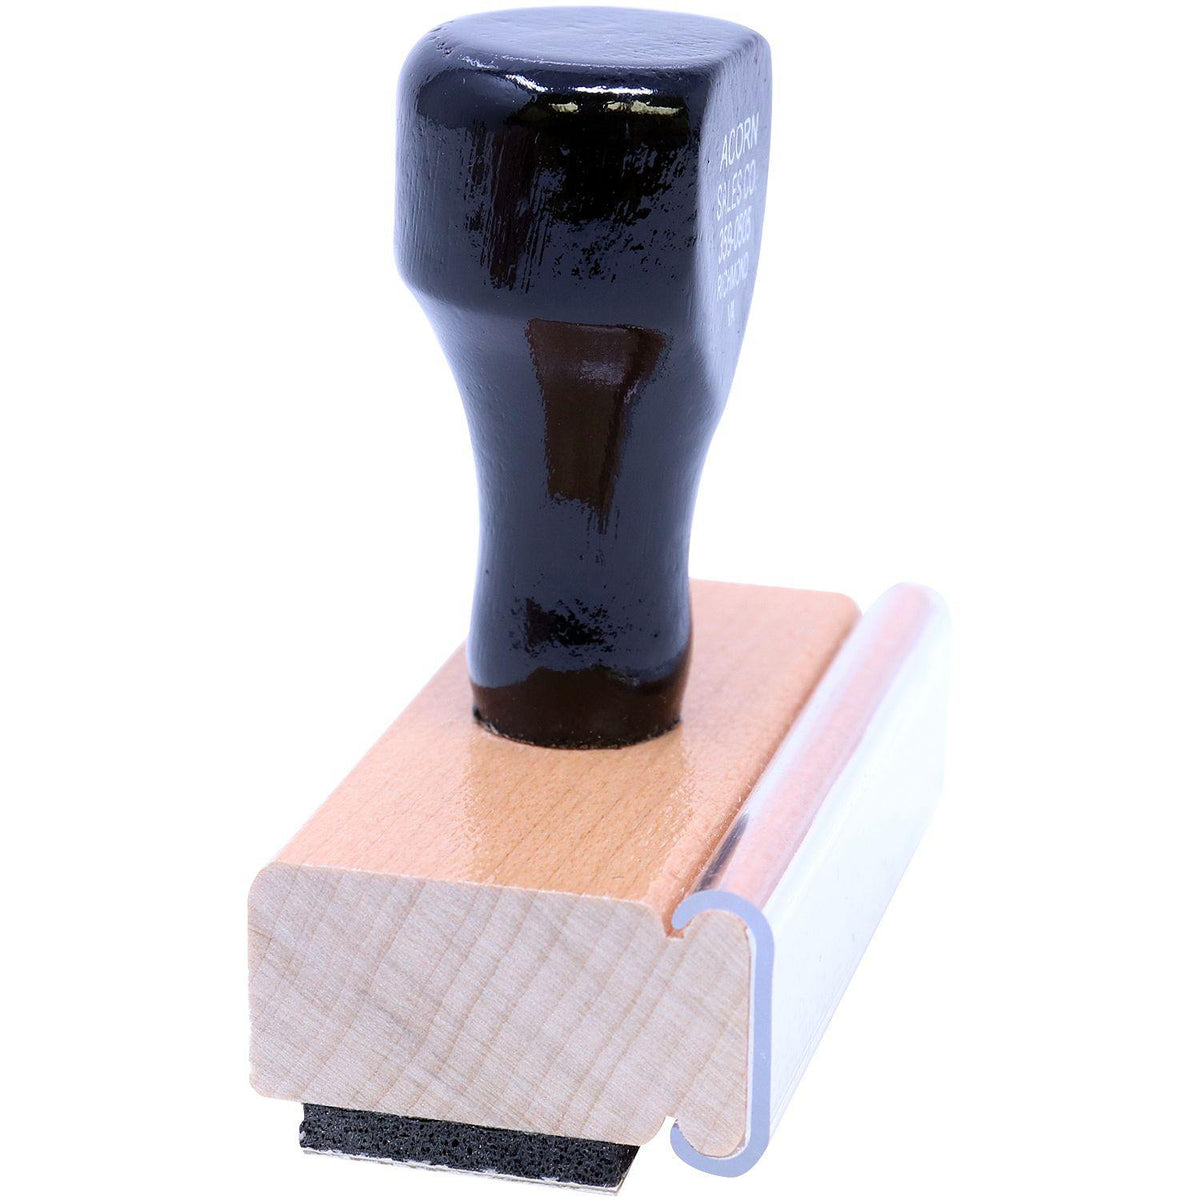 Large Two Thumbs Up with Thumb Icon Rubber Stamp - Engineer Seal Stamps - Brand_Acorn, Impression Size_Large, Stamp Type_Regular Stamp, Type of Use_Teacher